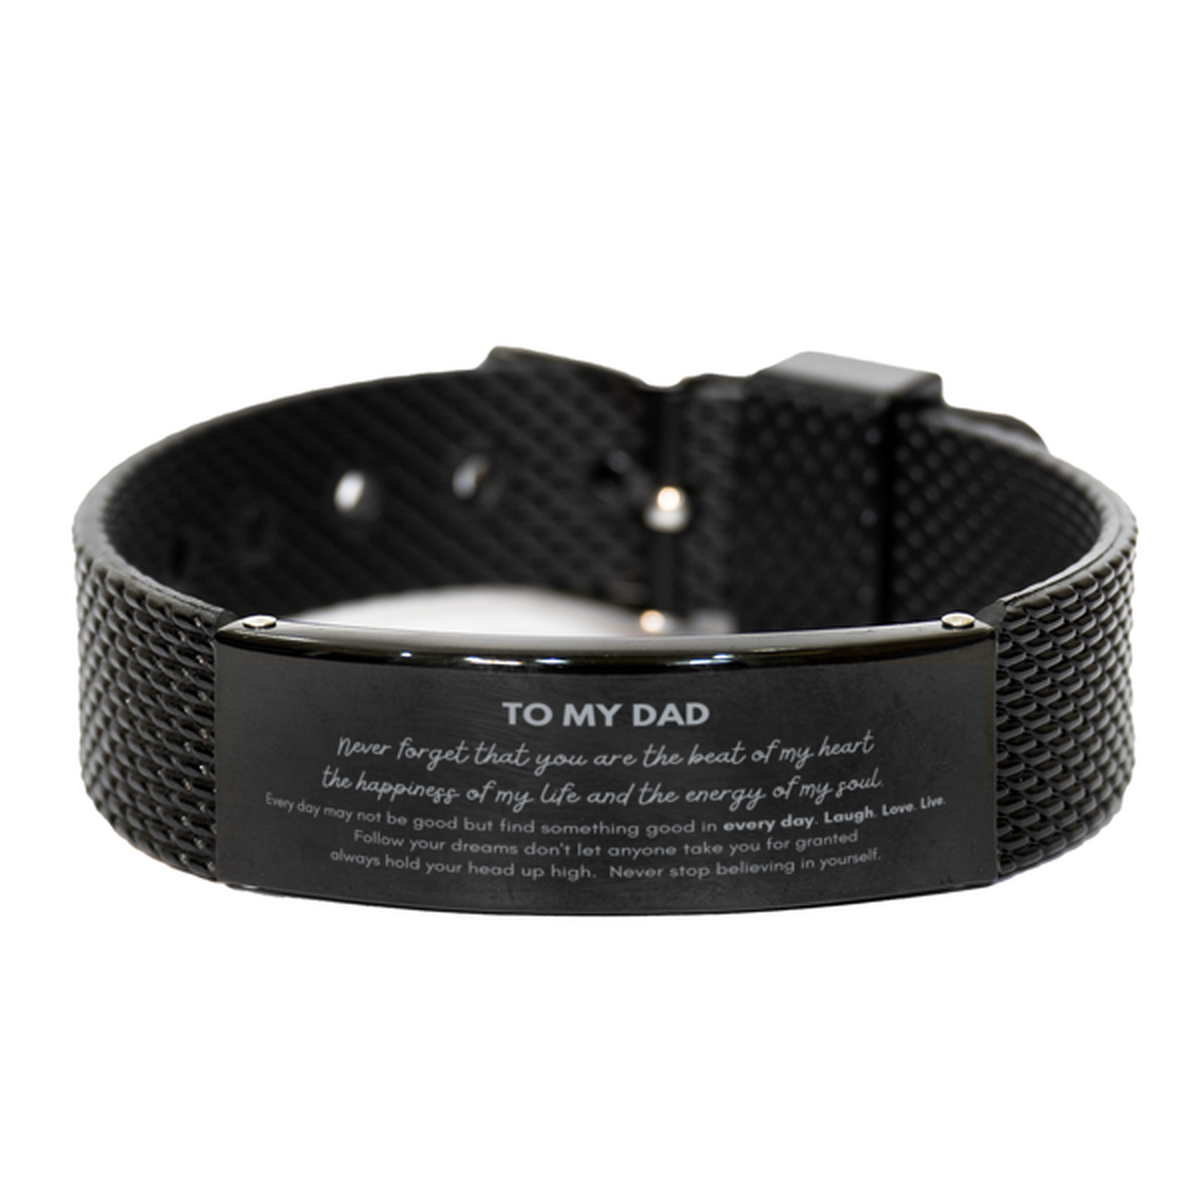 To My Dad Bracelet Gifts, Christmas Dad Black Shark Mesh Bracelet Present, Birthday Unique Motivational For Dad, To My Dad Never forget that you are the beat of my heart the happiness of my life and the energy of my soul